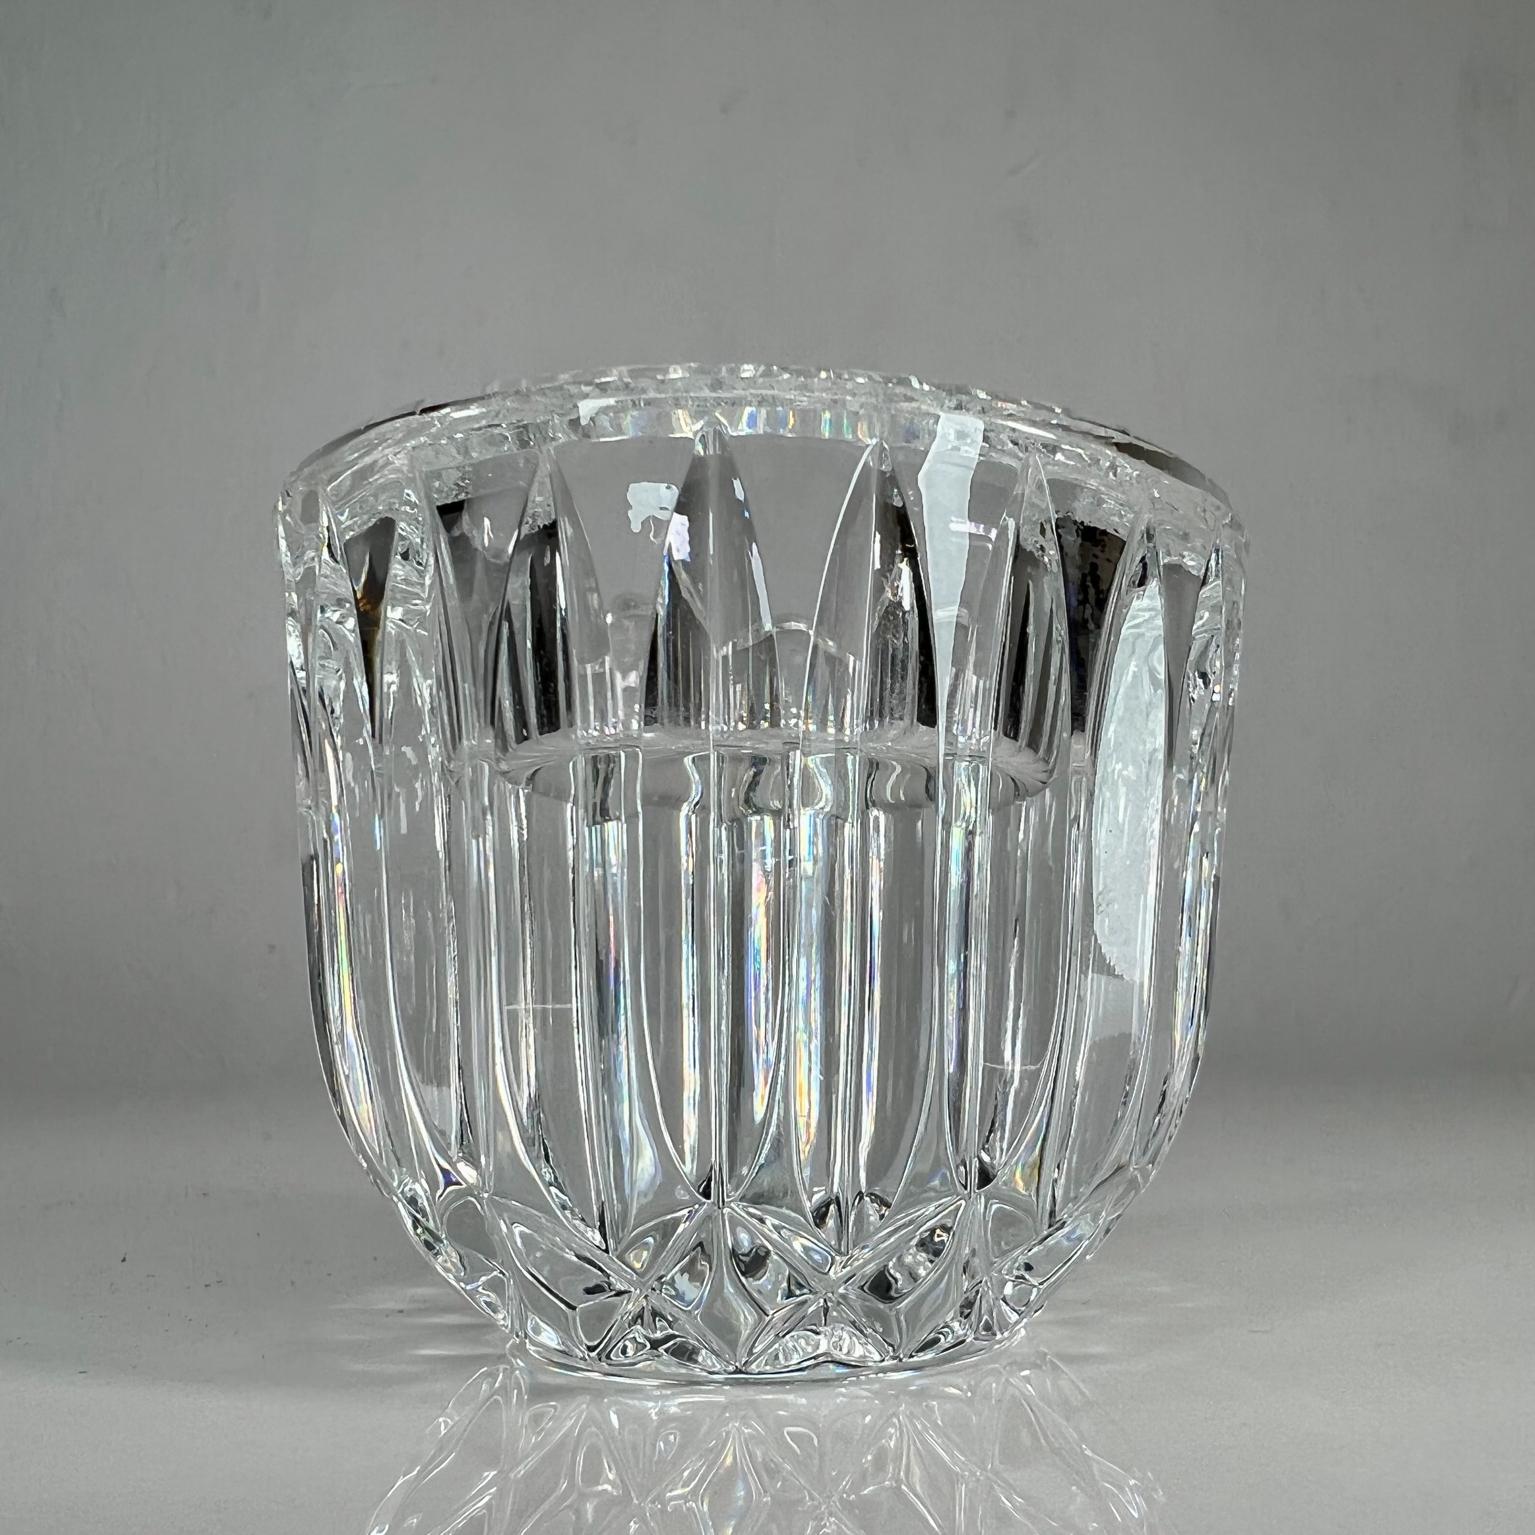 Elegant Crystal Glass Votive Tealight Candle Holder by Waterford Ireland 1